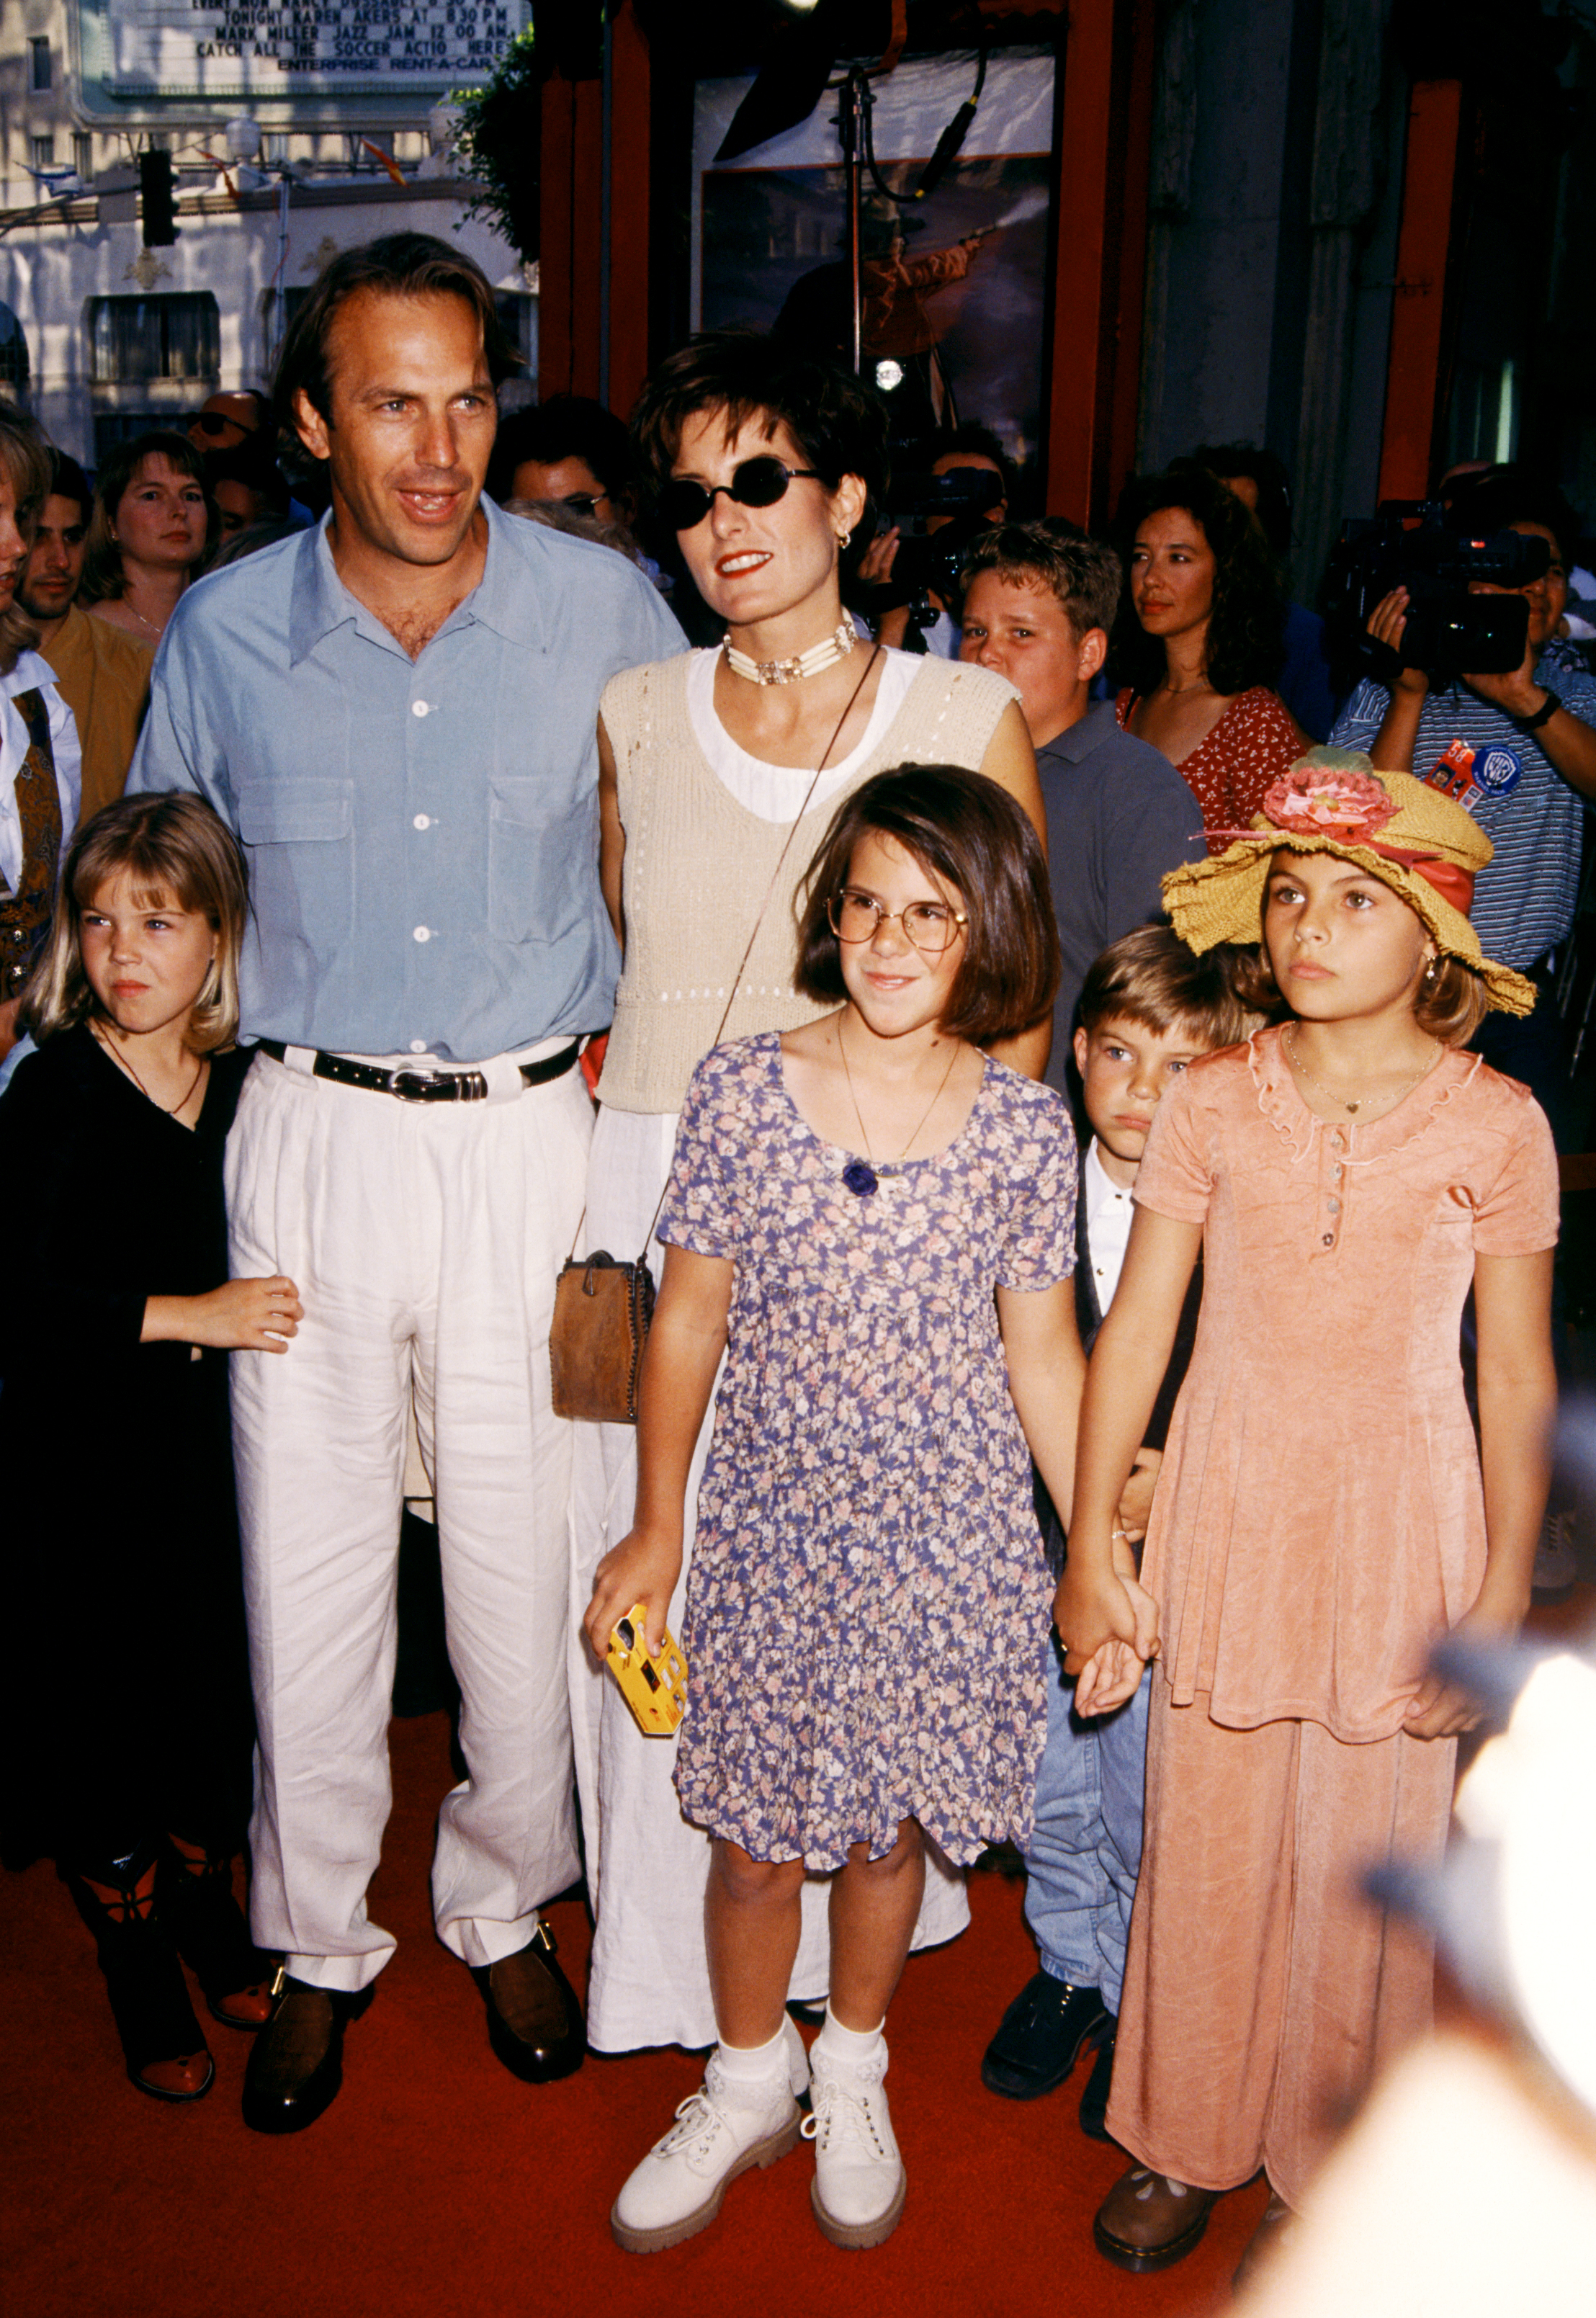 Kevin Costner poses for a portrait with his ex-wife, Cindy Costner, and their children, Annie, Lily, and Joe at the "Wyatt Earp" Hollywood premiere on June 18, 1994 at the Mann's Chinese Theater in Hollywood, California. | Getty Images